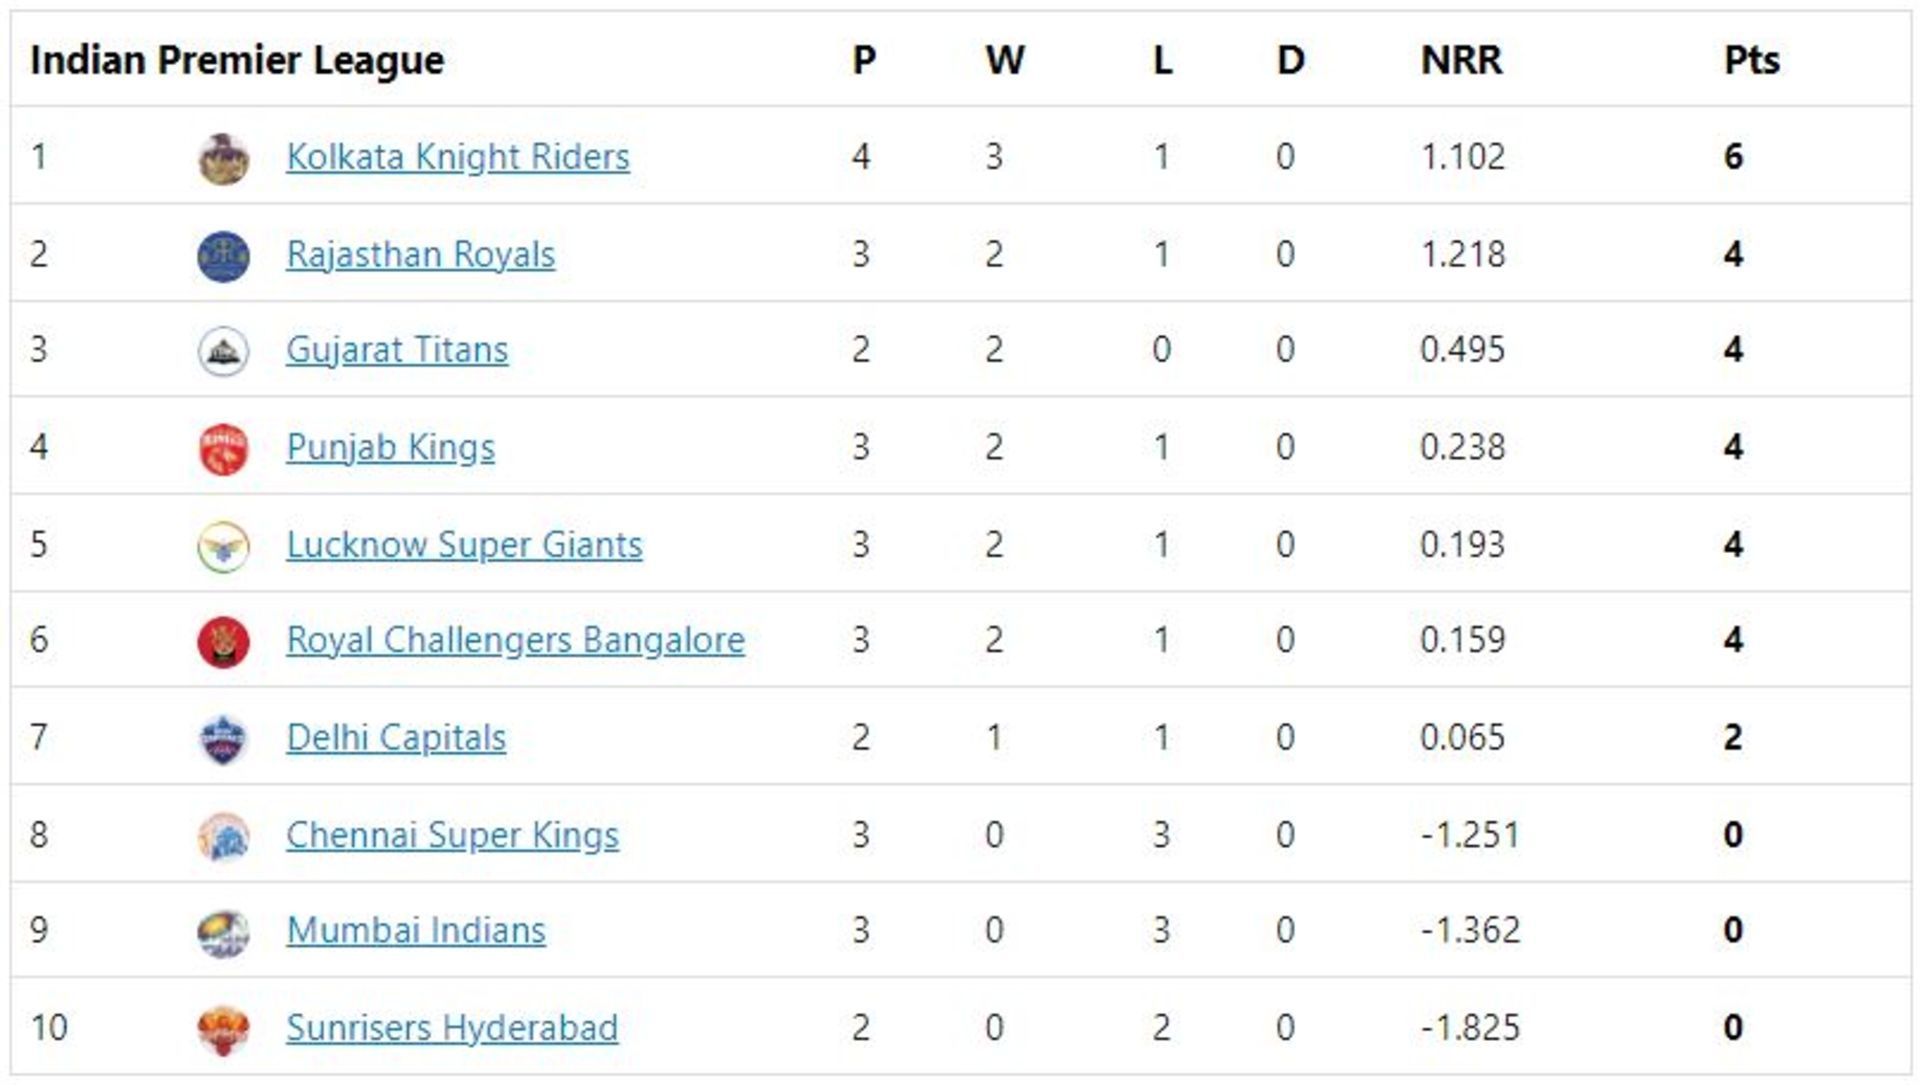 KKR move to the top spot with their third win of the tournament.